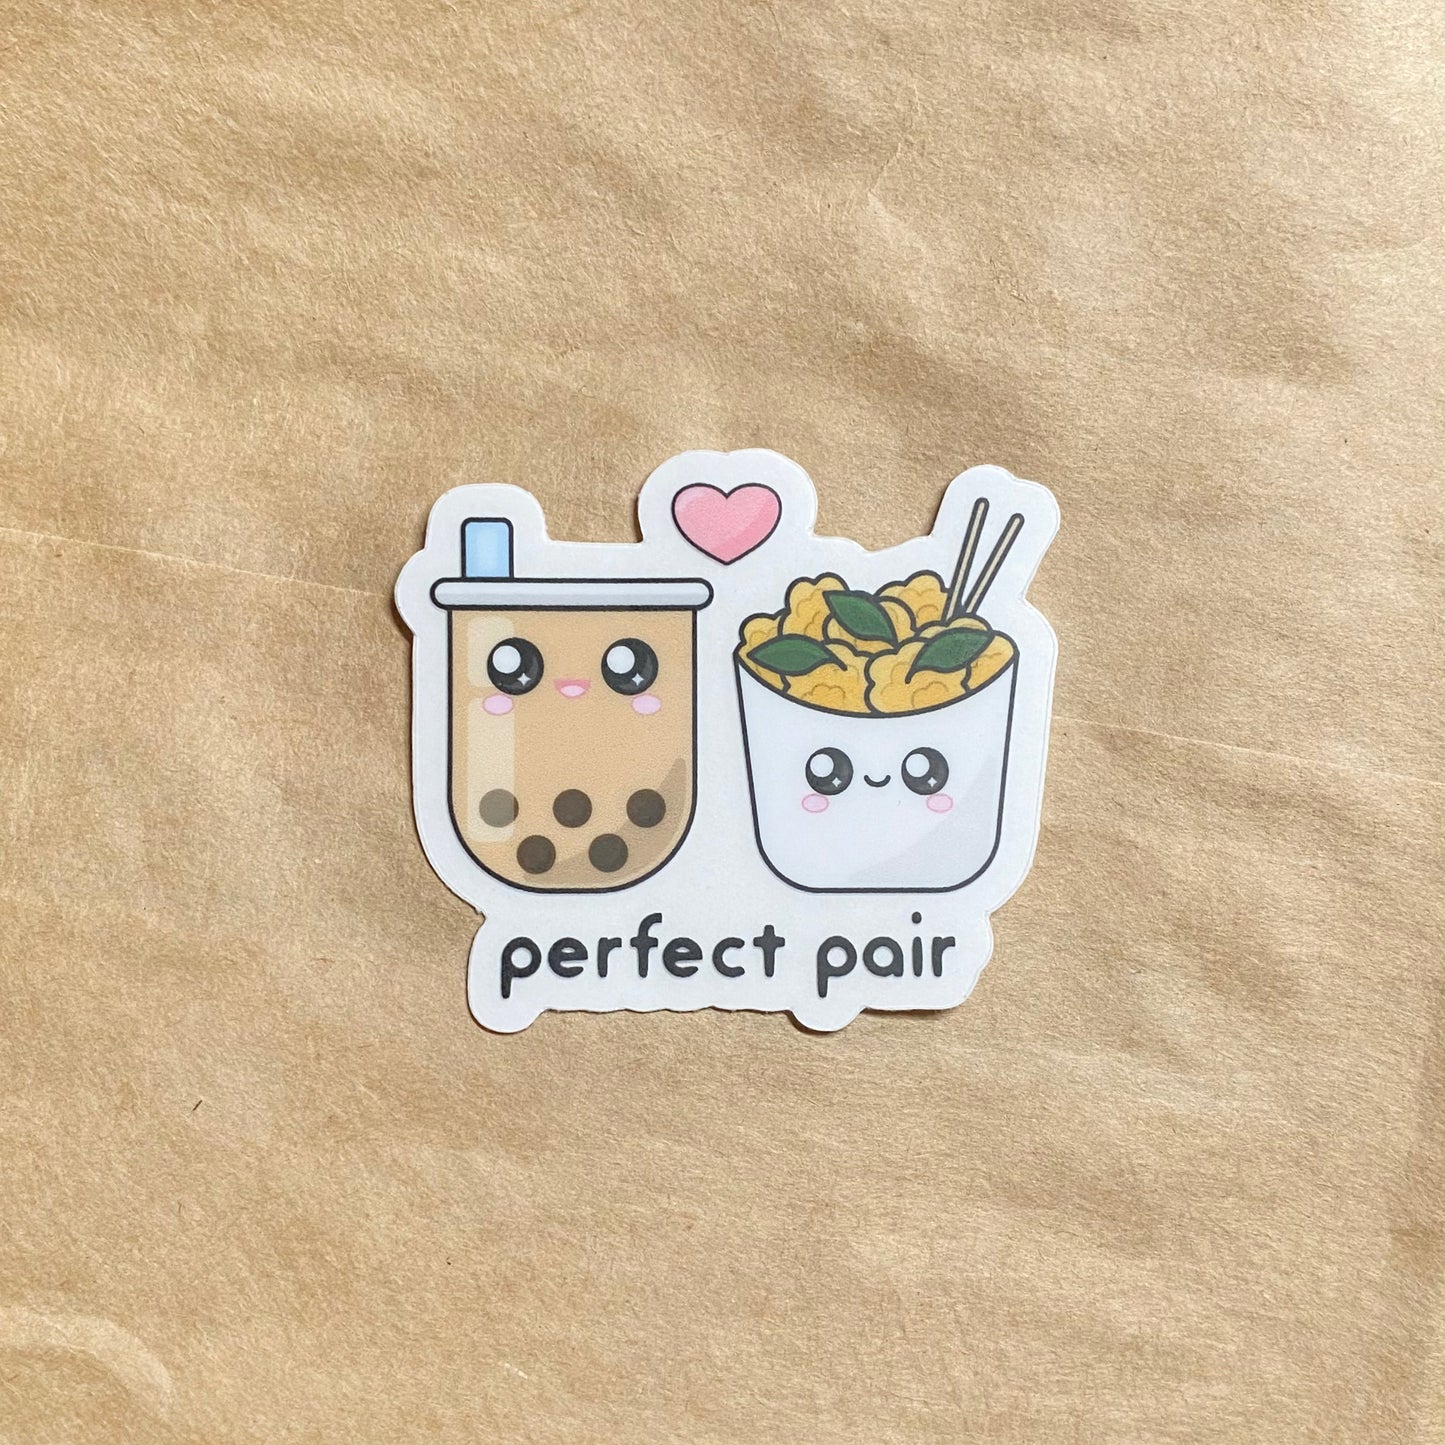 Sticker with a clear background placed on a brown piece of paper, showing the white paper backing still attached. The sticker features a cute open-mouth smiling boba milk tea and a closed-mouthed smiling Taiwanese popcorn chicken. A pink heart is between them, with the words 'perfect pair' printed below.